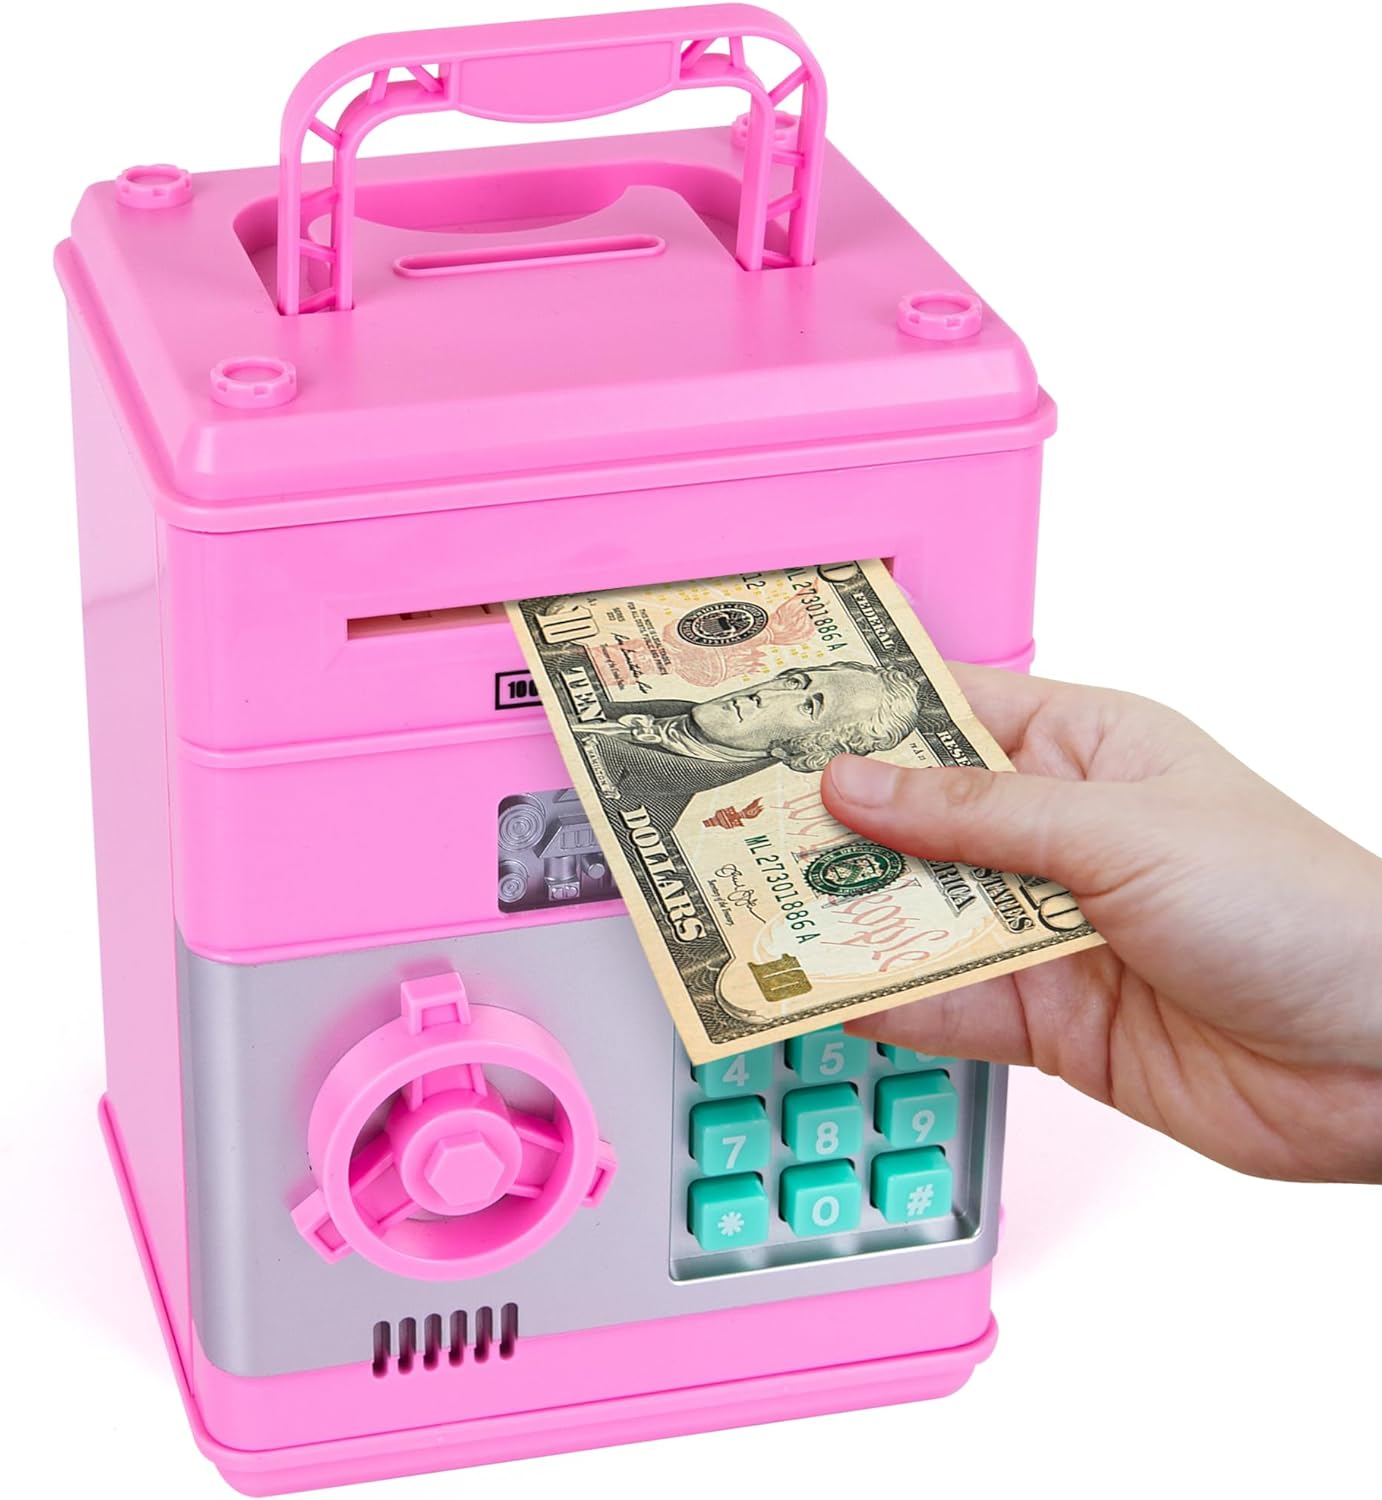 ArtCreativity ATM Piggy Bank for Kids - Pink Piggy Bank for Girls - ATM-Style Bill Retracting and Coin Slot on Top - Passcode -Protected Electric Piggy Bank - Cool Kids ATM Machine for Early Savings